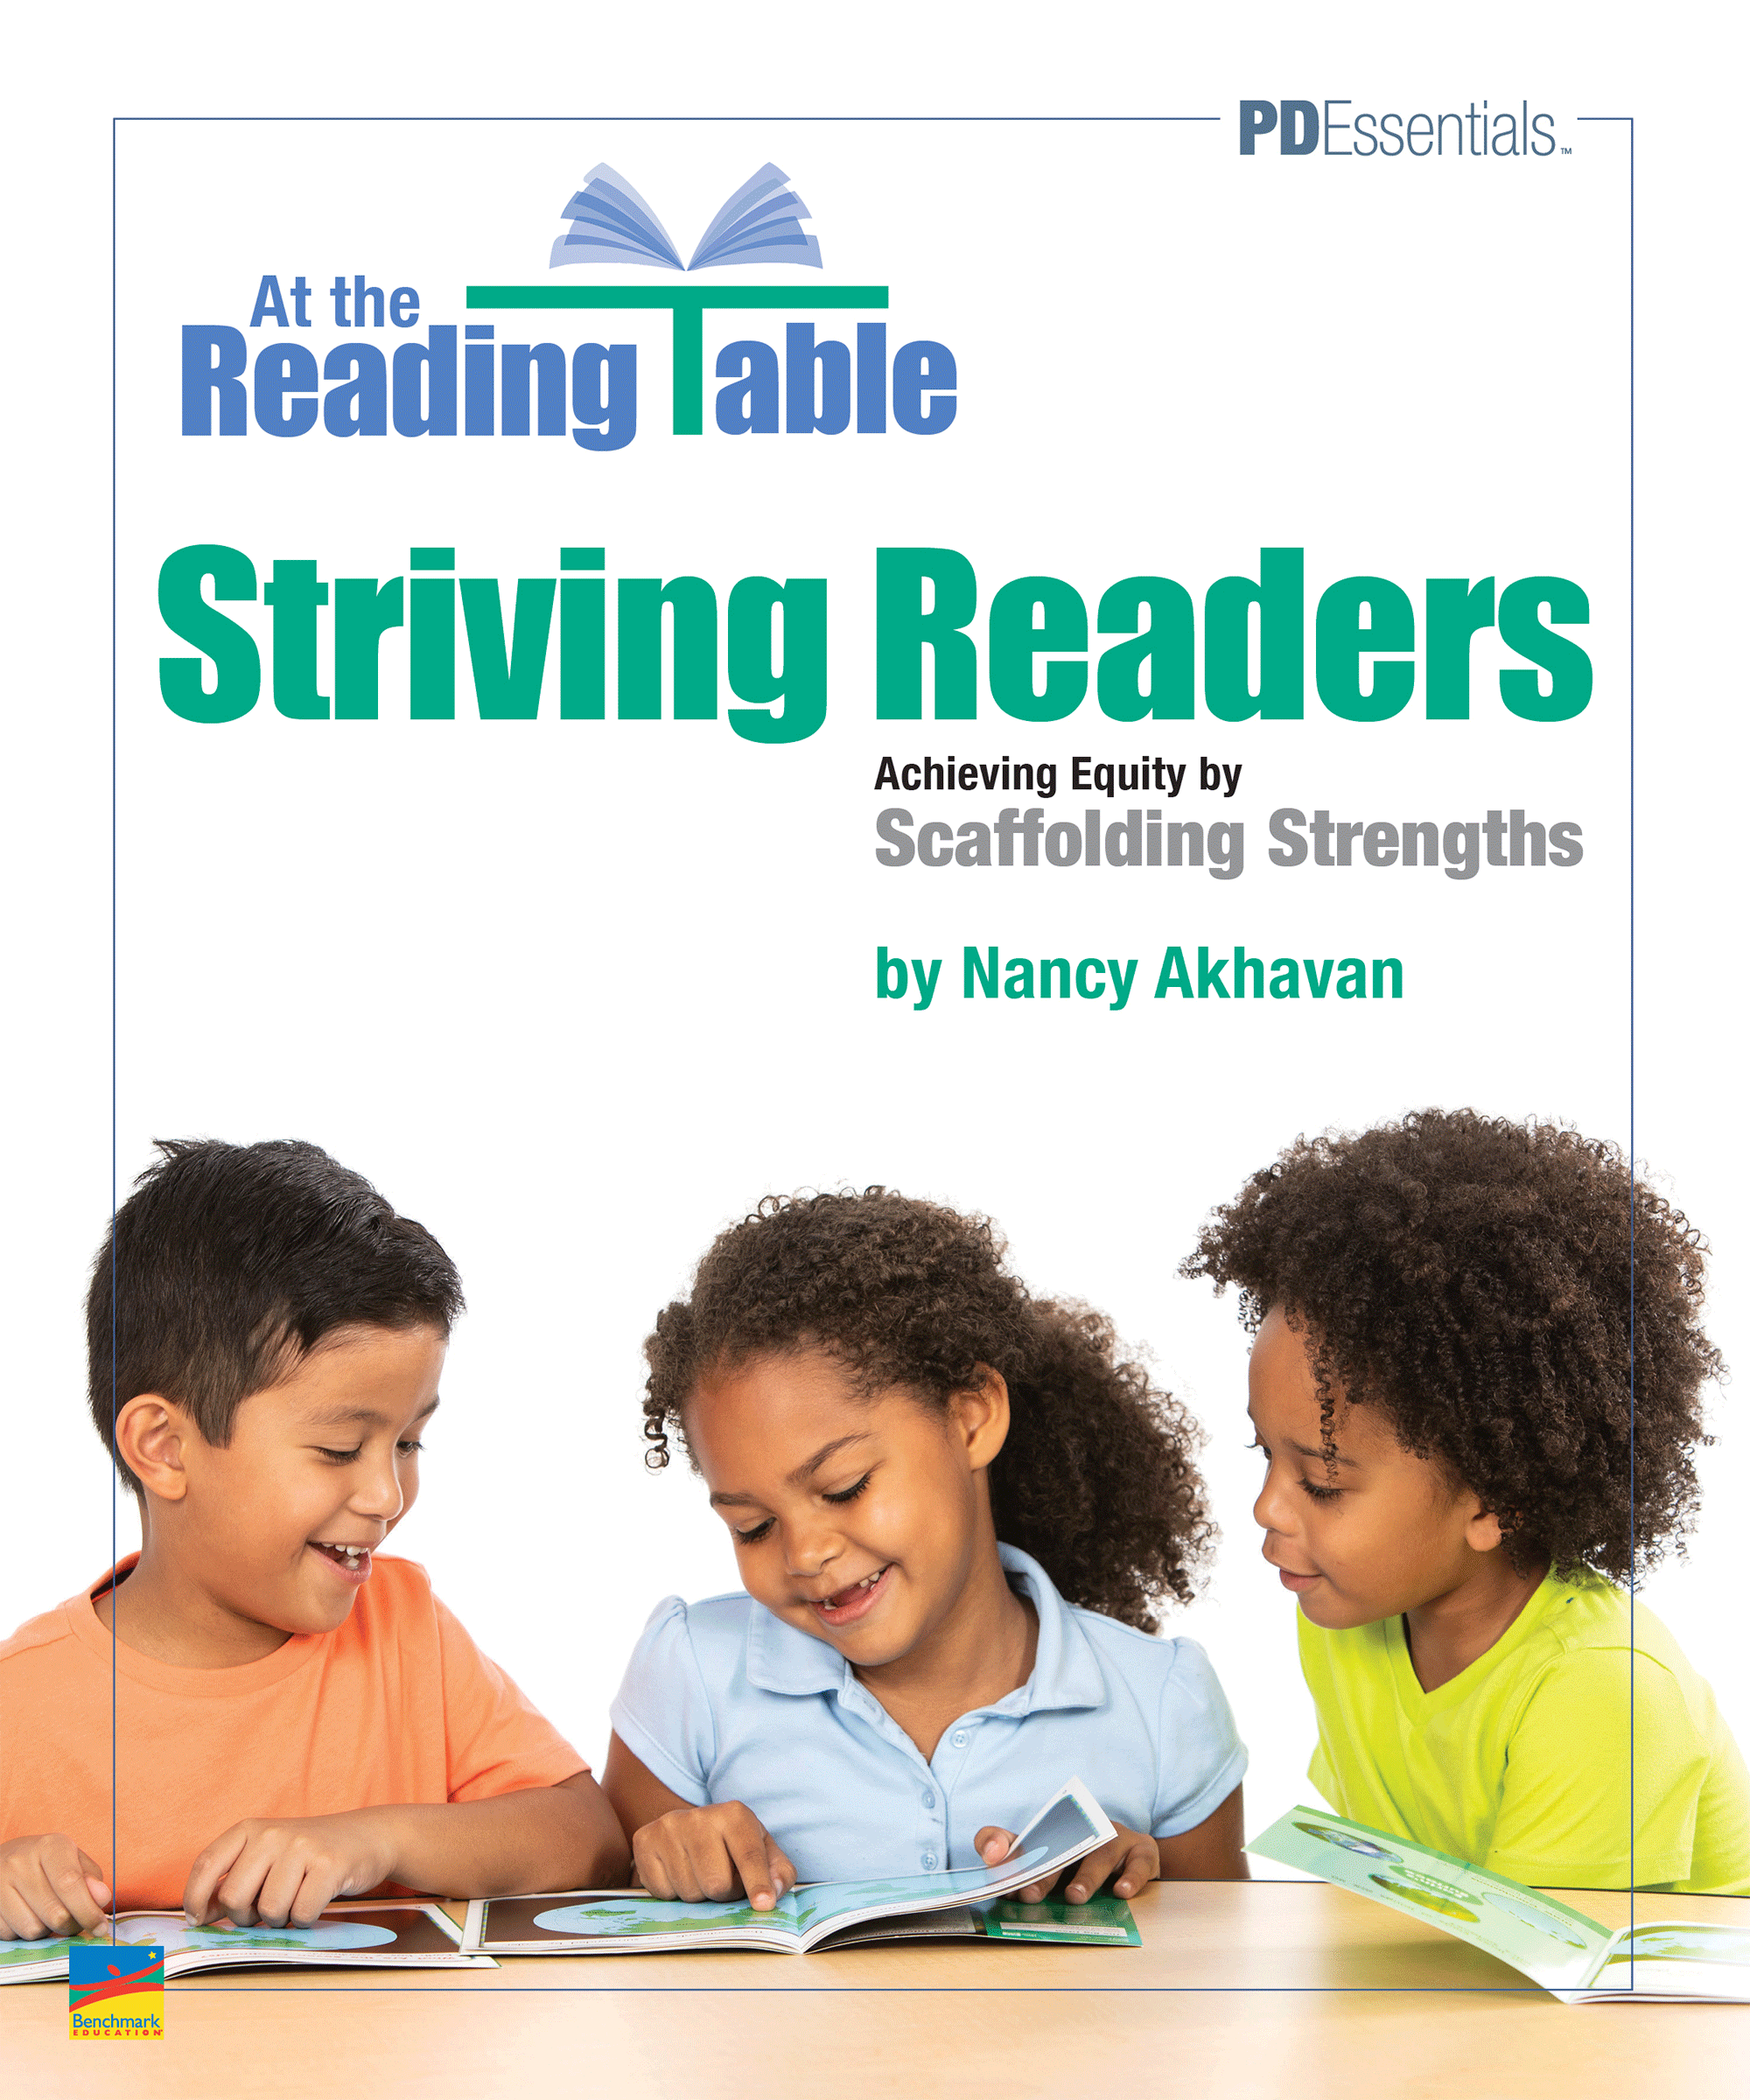 At the Reading Table—Striving Readers